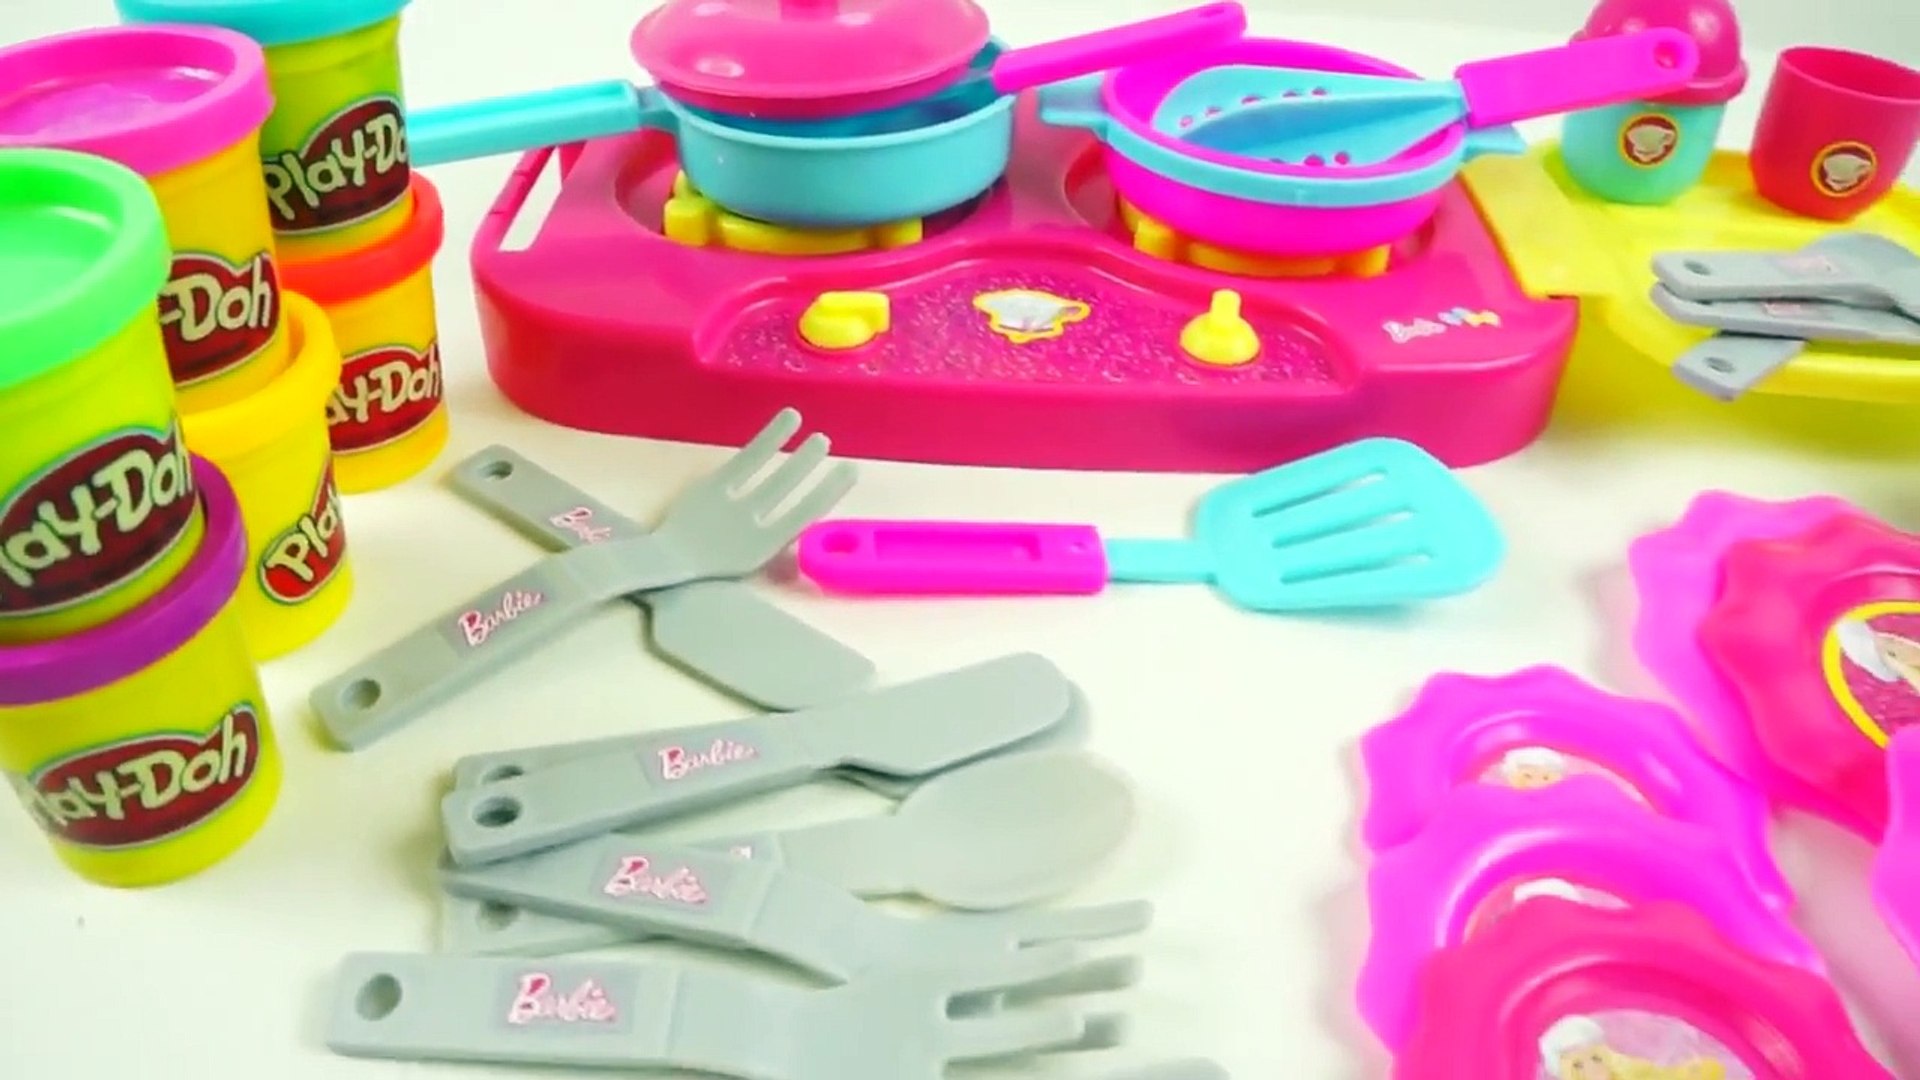 Barbie Play Doh Cooking Set Barbie Kitchen Toys Play Doh Cookies Spielzeug  Juguetes - video Dailymotion